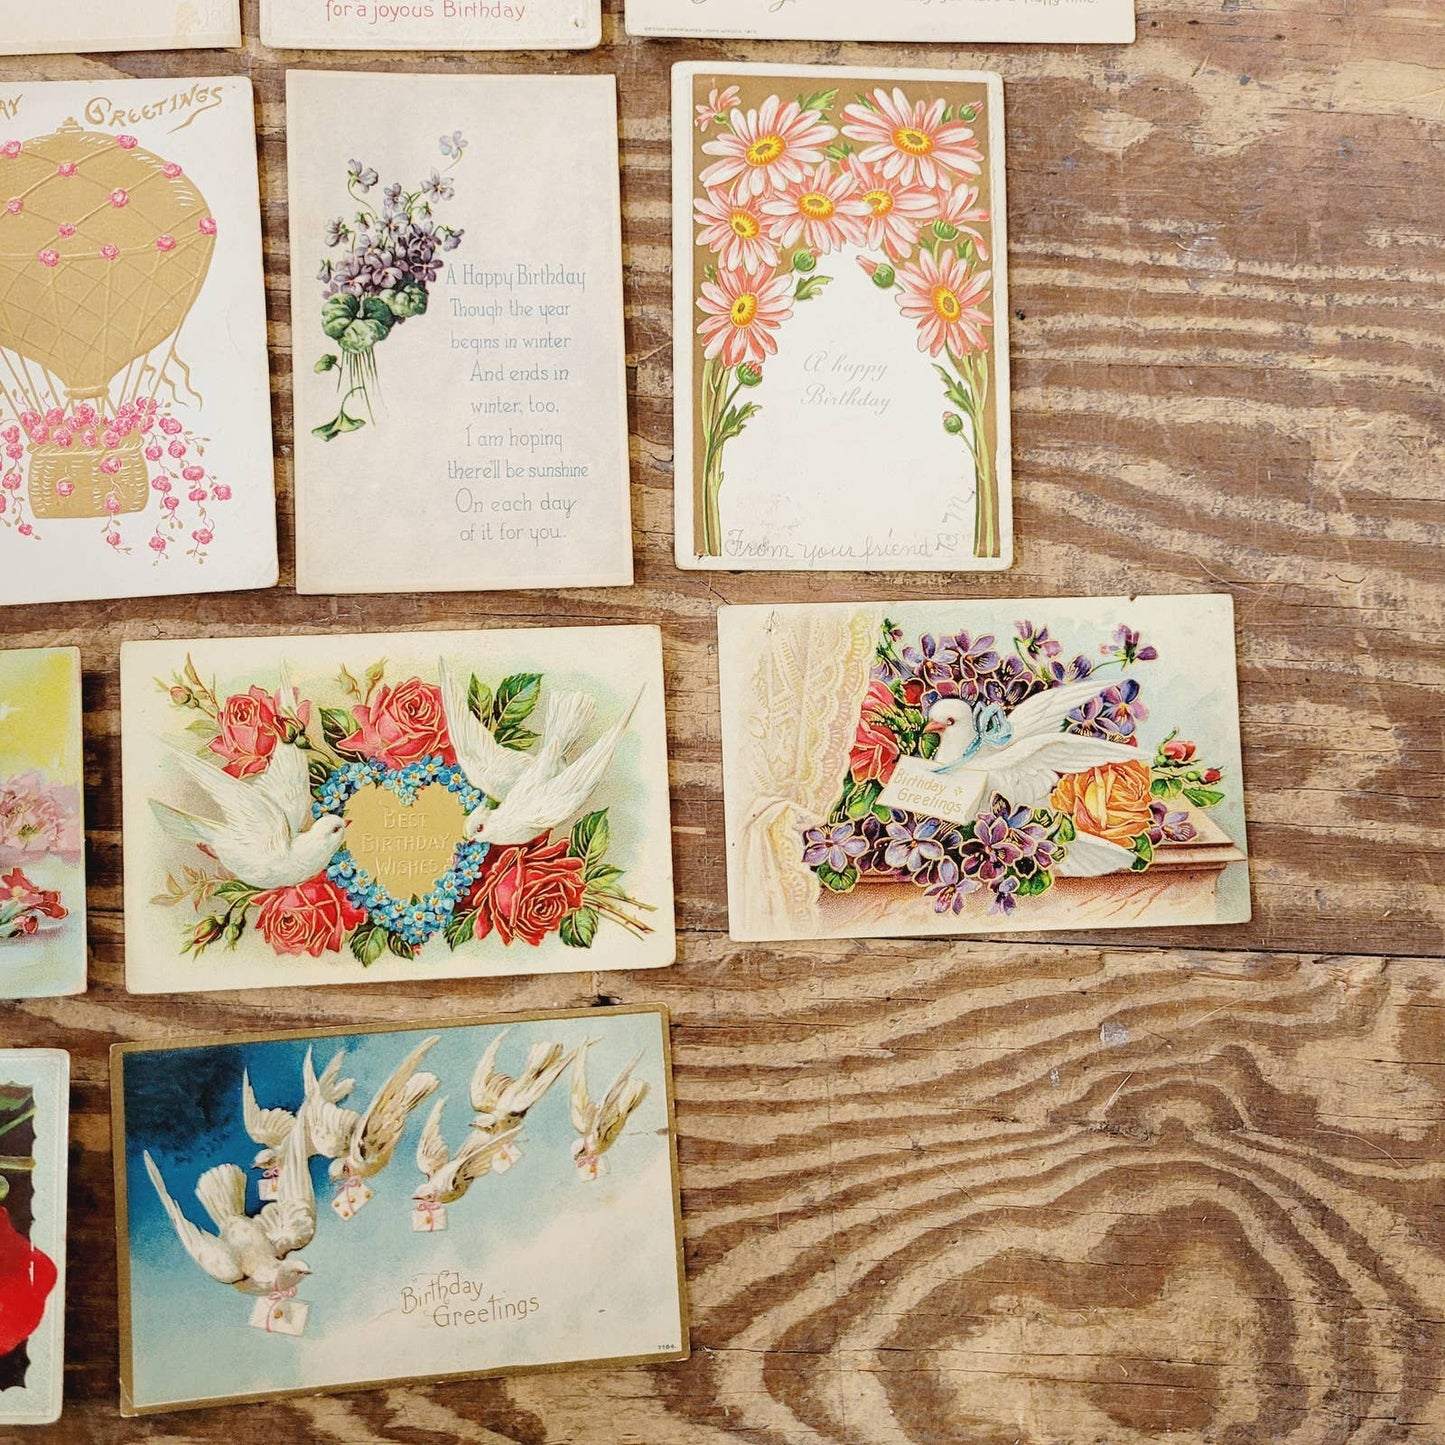 Lot of 22 Antique Postcards Early 1900's Floral Embossed Birthday